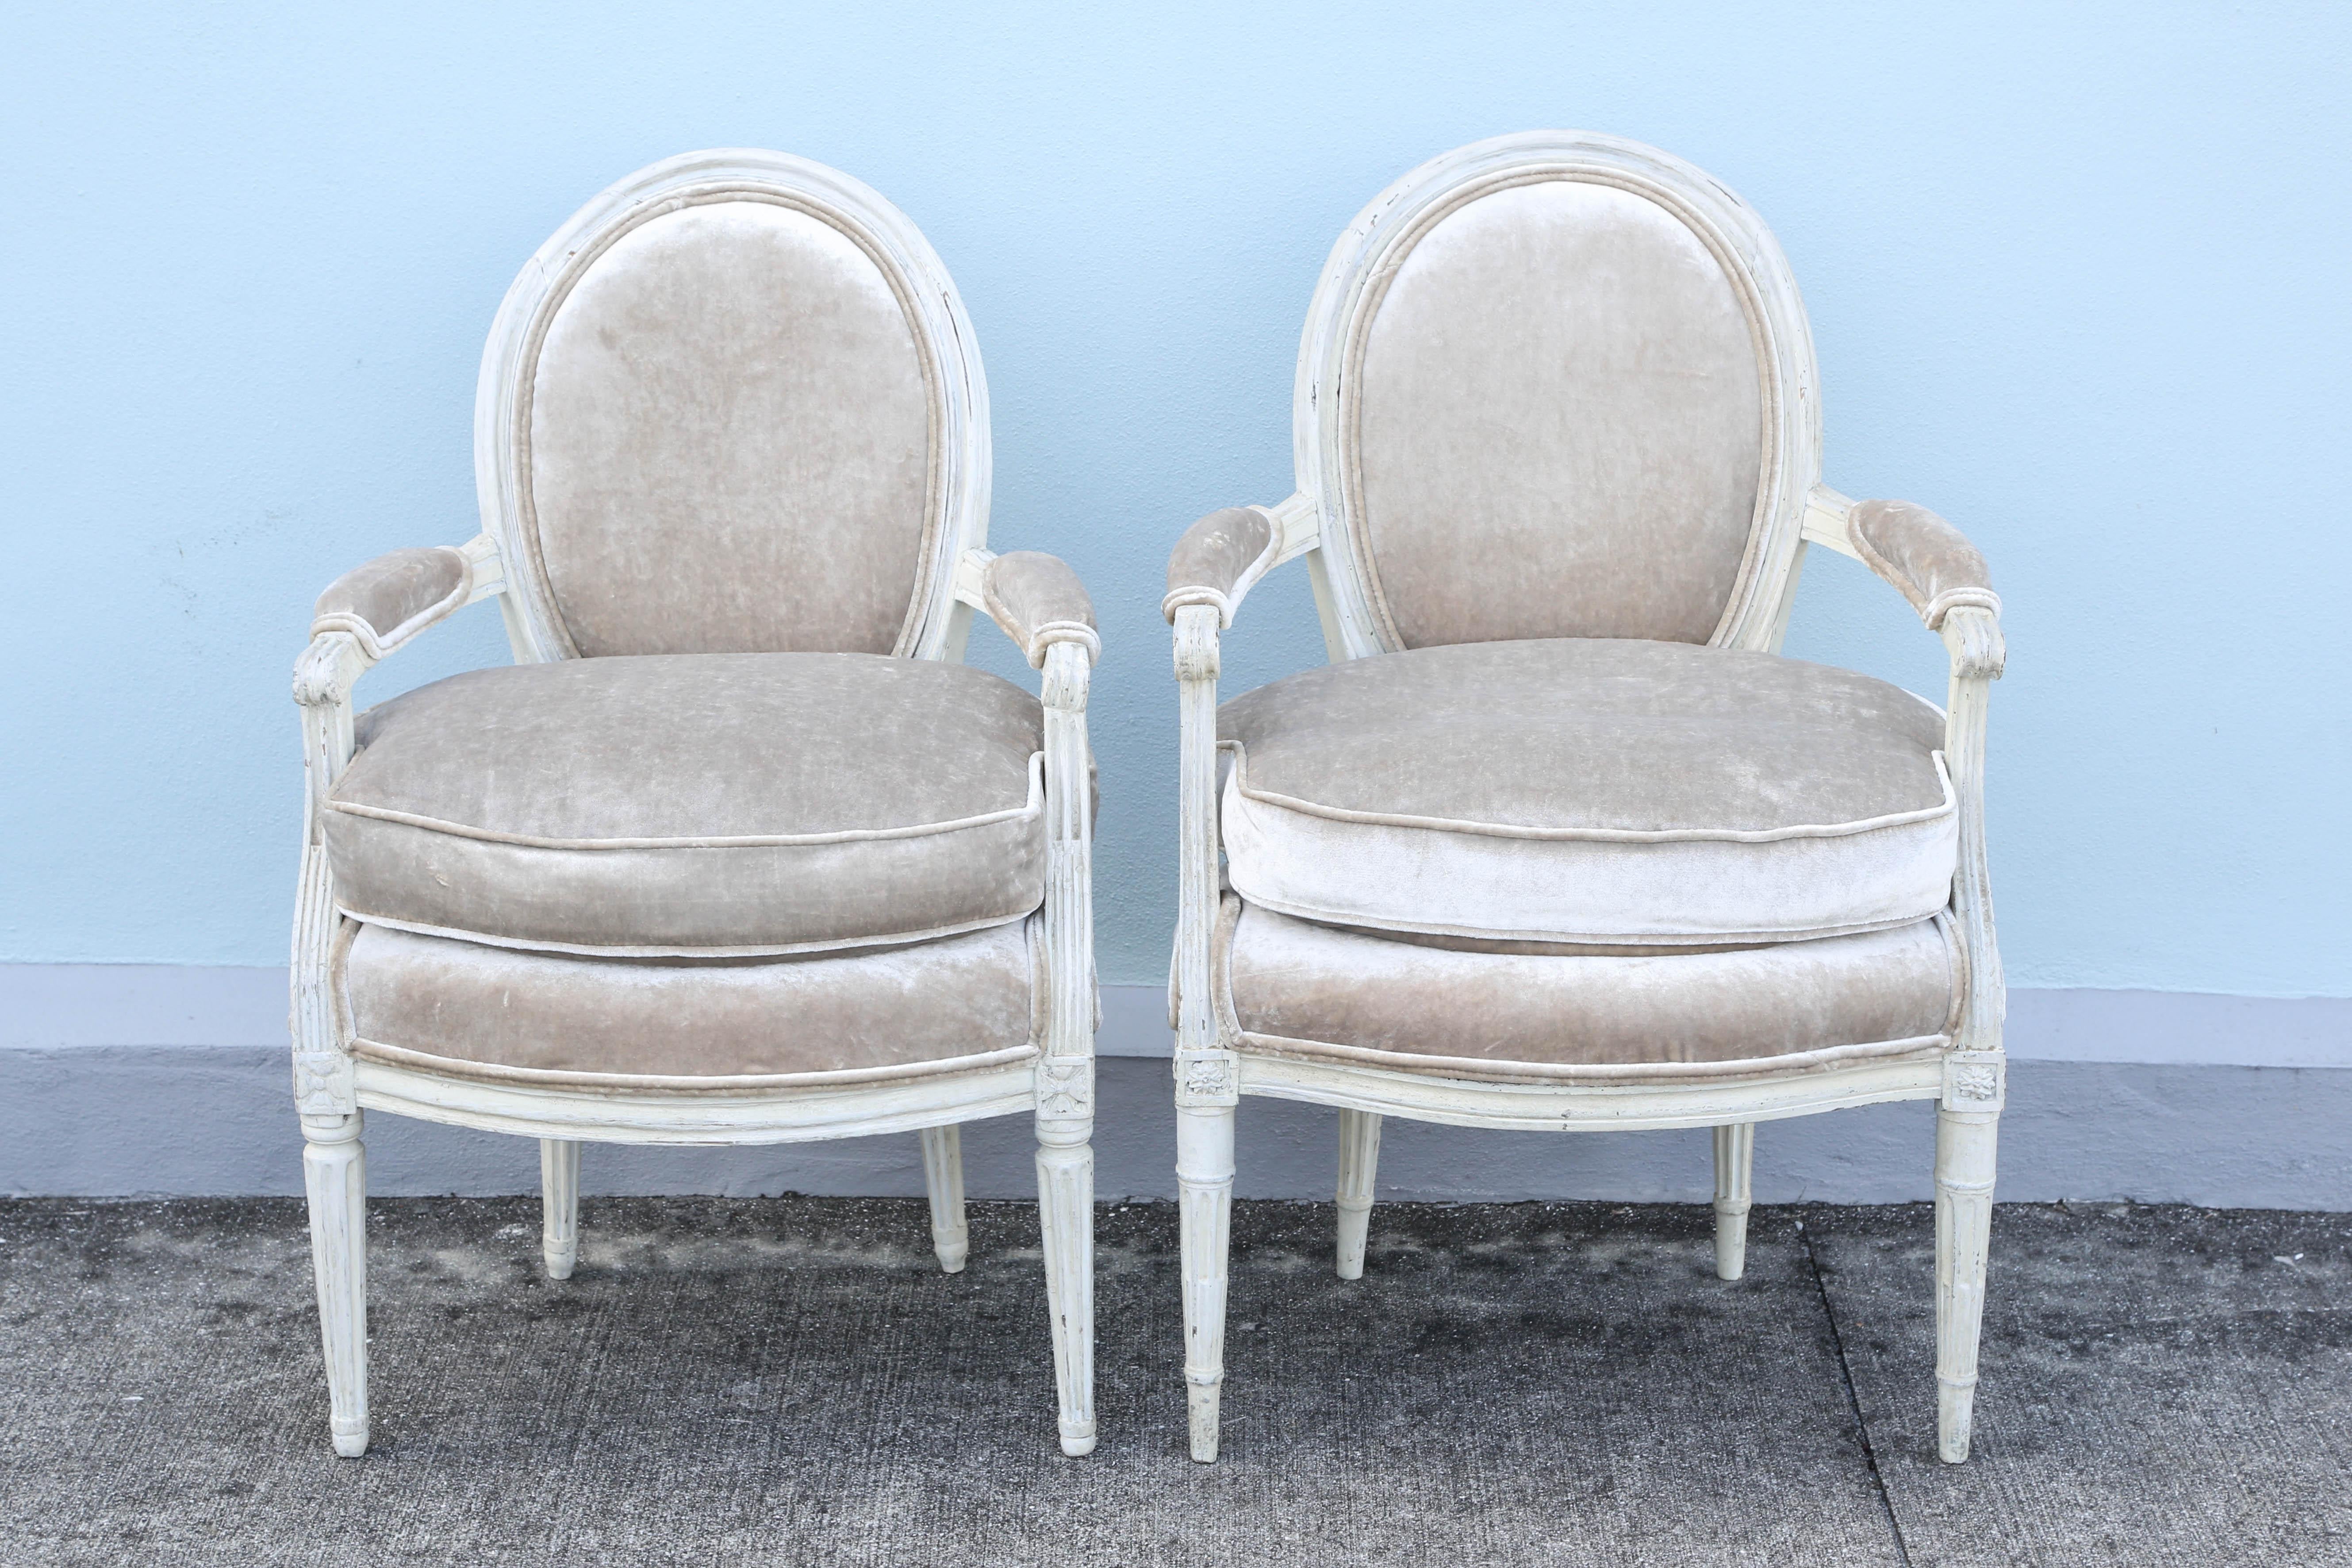 Faux pair of Period Louis XVI armchairs newly upholstered in velvet with ribbed silk backs.